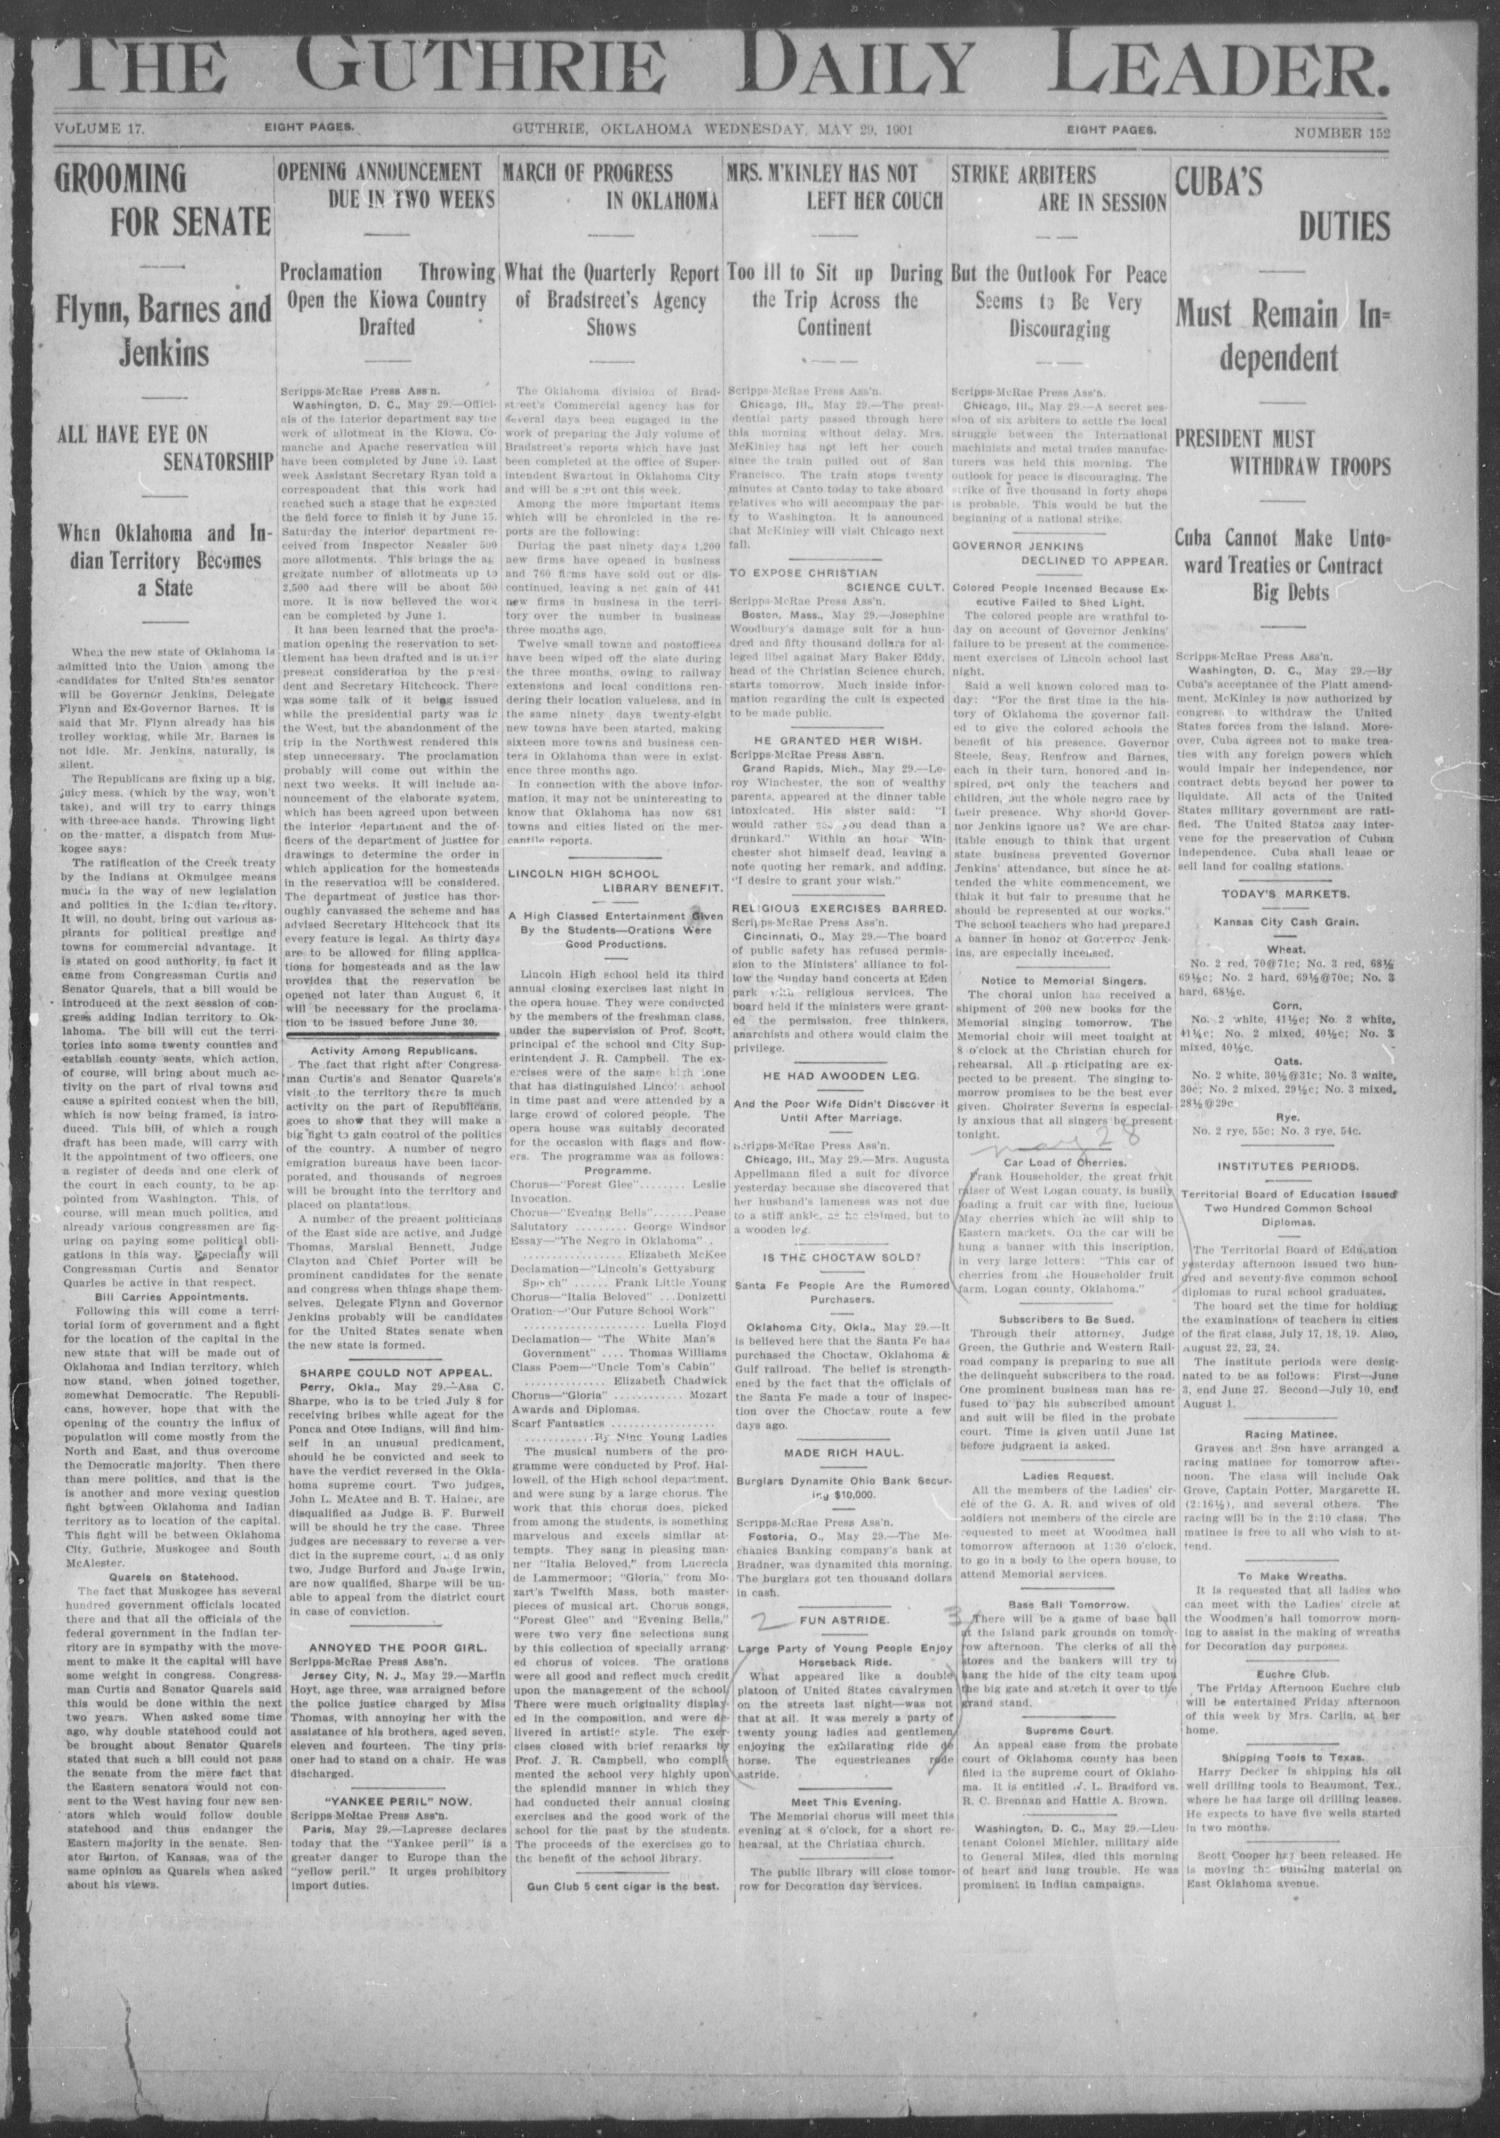 The Guthrie Daily Leader. (Guthrie, Okla.), Vol. 17, No. 152, Ed. 1, Wednesday, May 29, 1901
                                                
                                                    [Sequence #]: 1 of 8
                                                